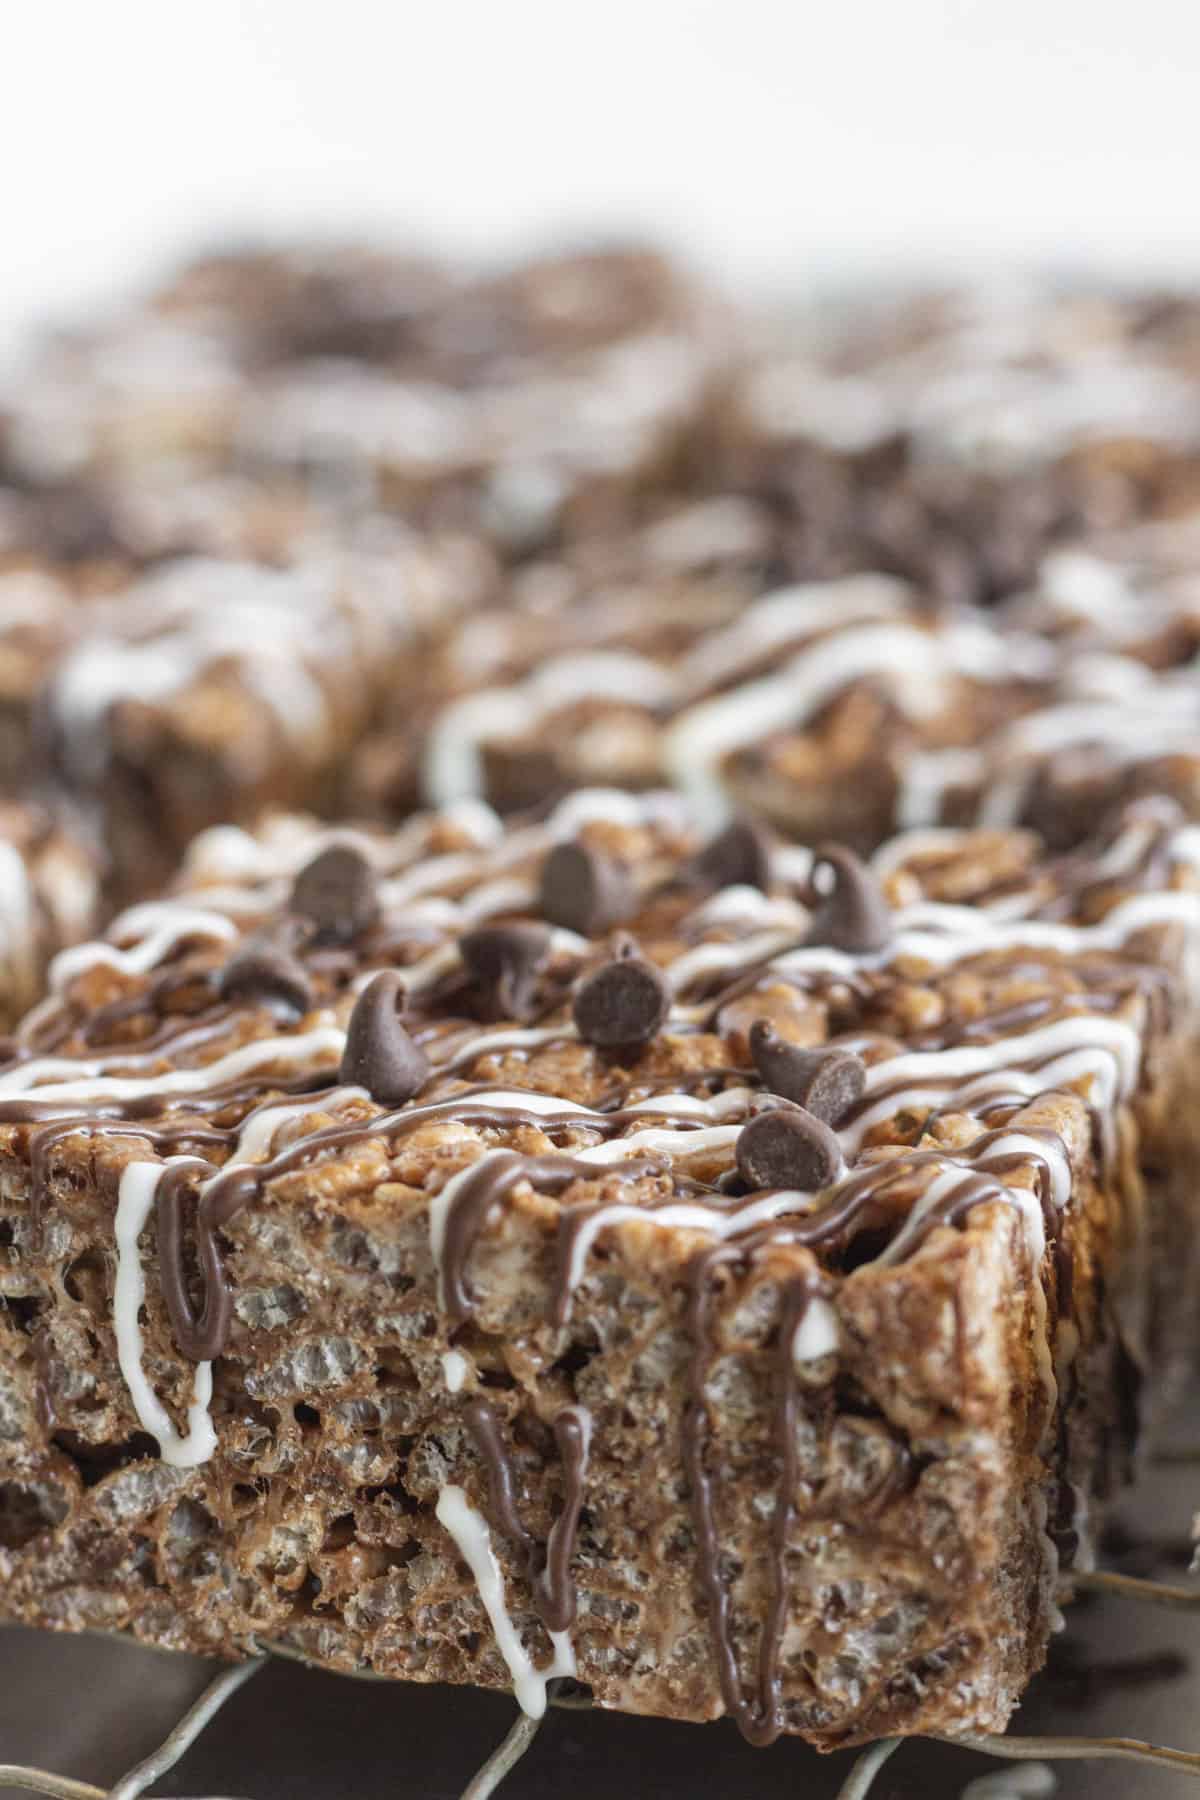 A close up photo showing the chocolate drizzle on top of each bar.